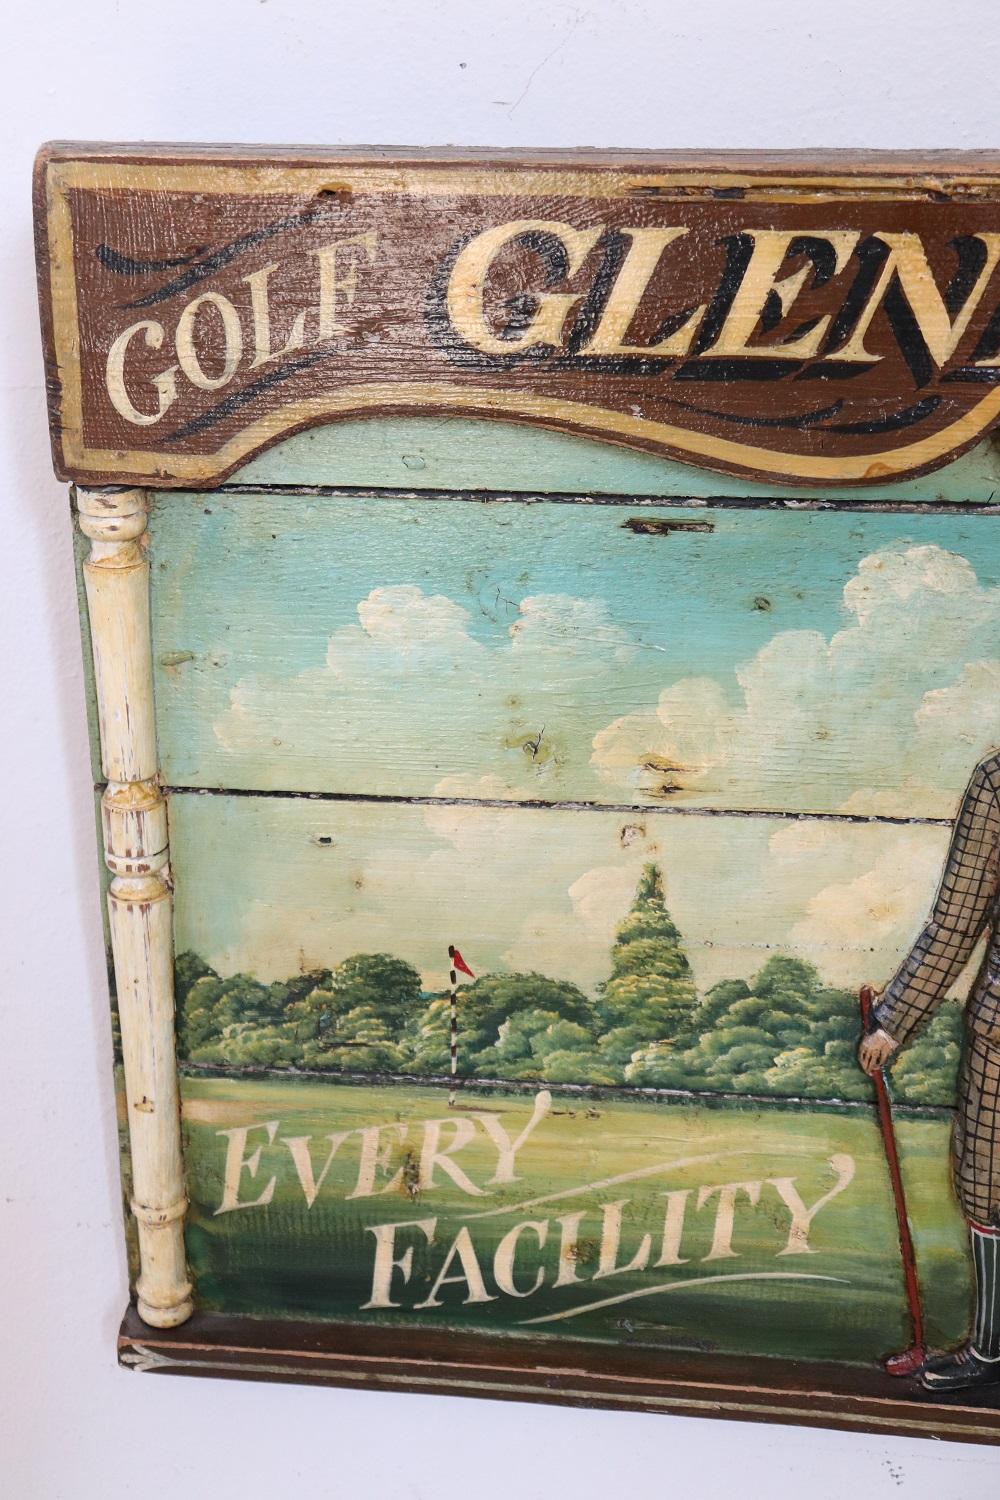 This vintage sign for collectors is truly special. Made of wood with relief decorations and hand painted. The sign was dedicated to the historic Gleneagles golf club founded in 1910.